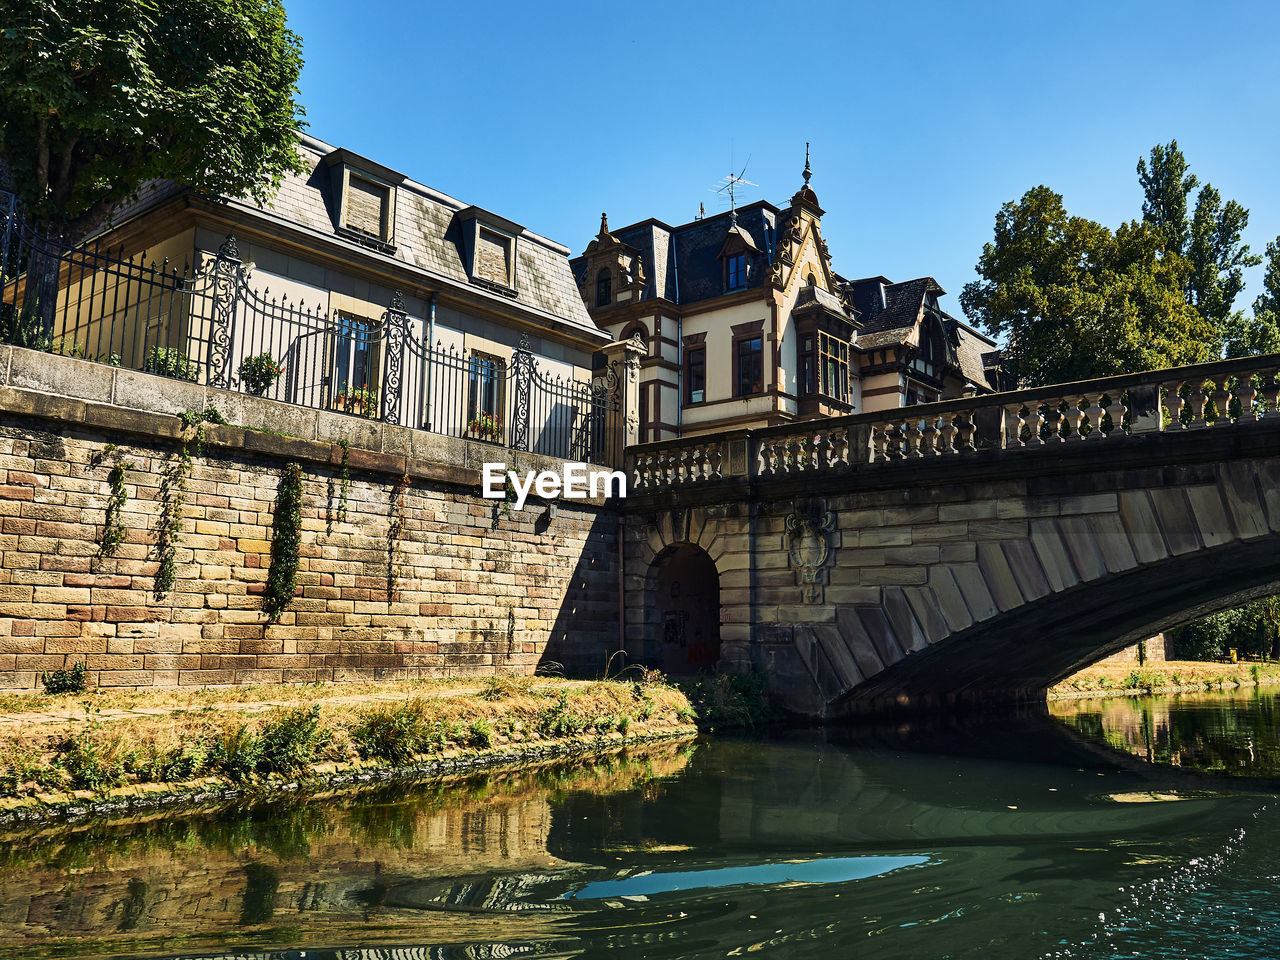 architecture, built structure, water, river, bridge, waterway, building exterior, nature, travel destinations, history, sky, the past, travel, city, landmark, tree, tourism, reflection, clear sky, building, plant, moat, château, transportation, no people, town, blue, waterfront, sunny, outdoors, arch, day, old, estate, arch bridge, medieval